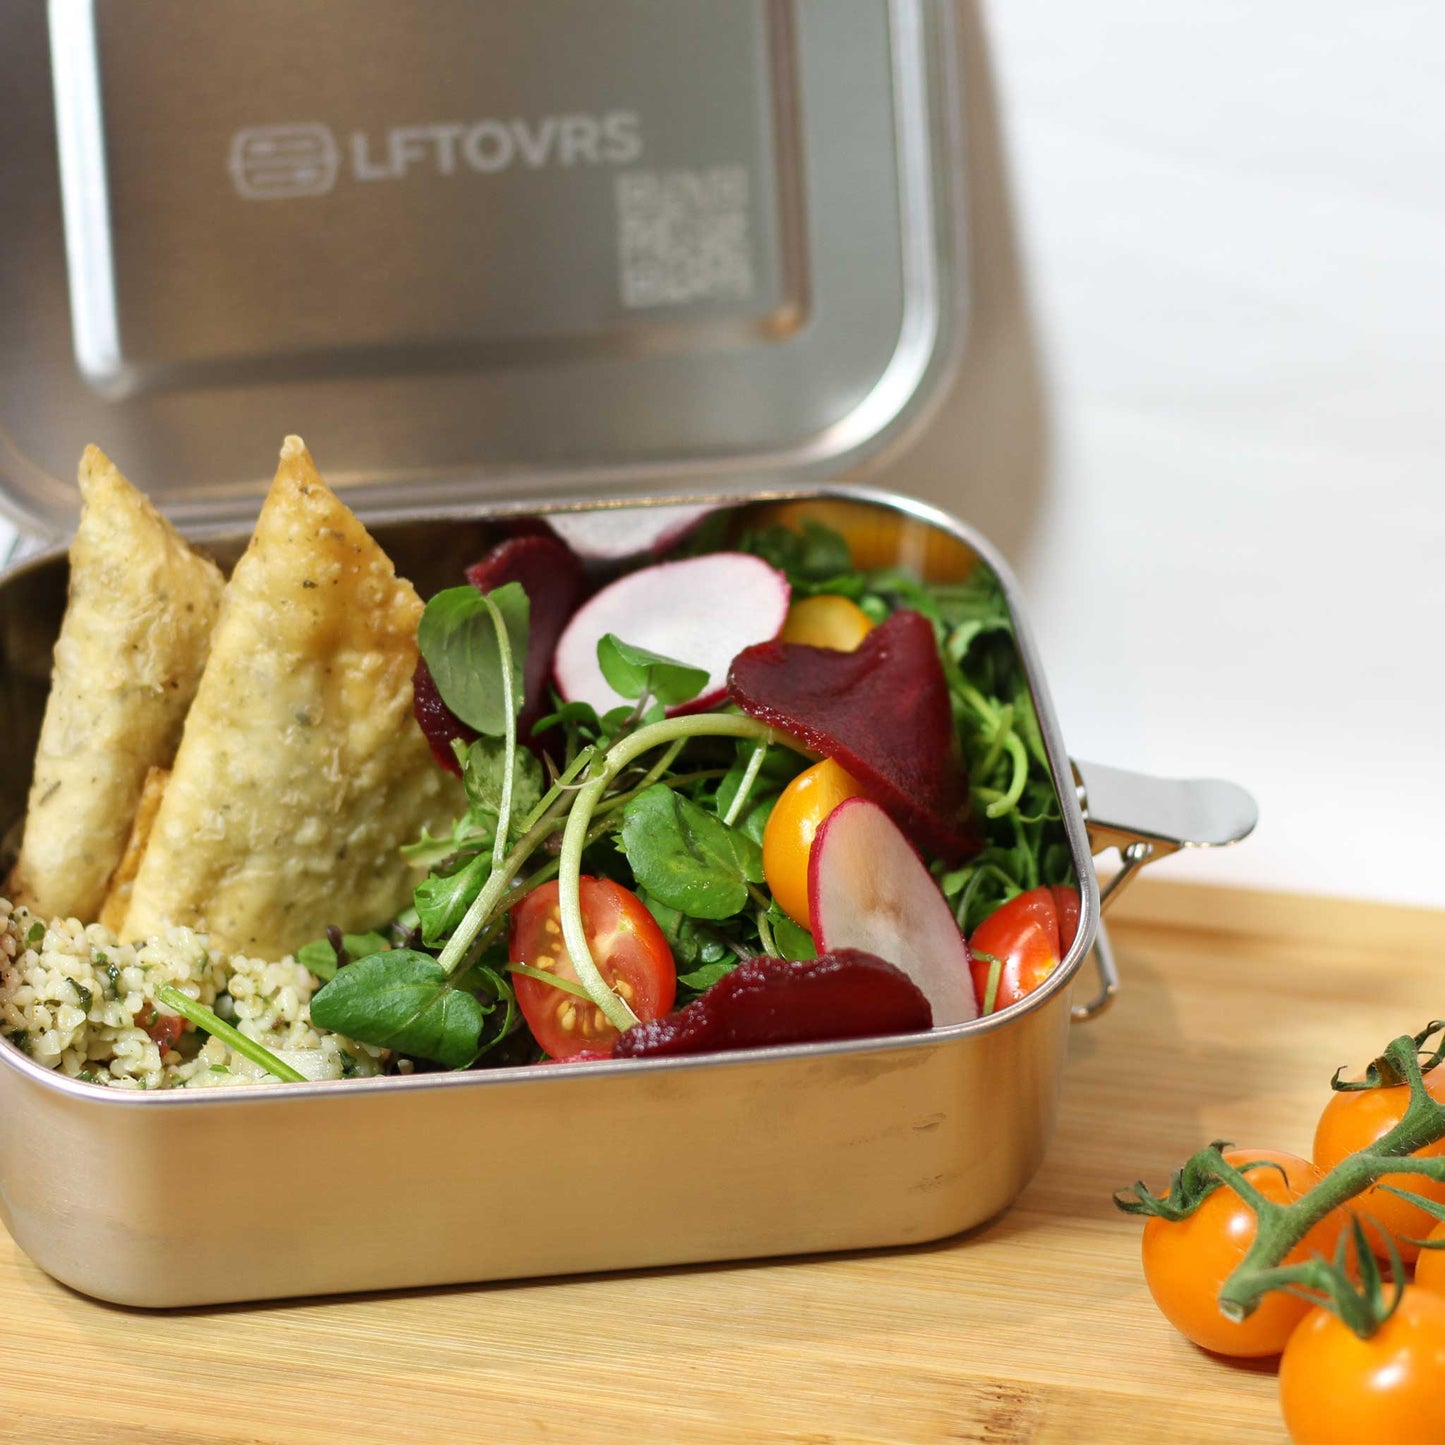 lunch inside a premium lunch box made from stainless steel